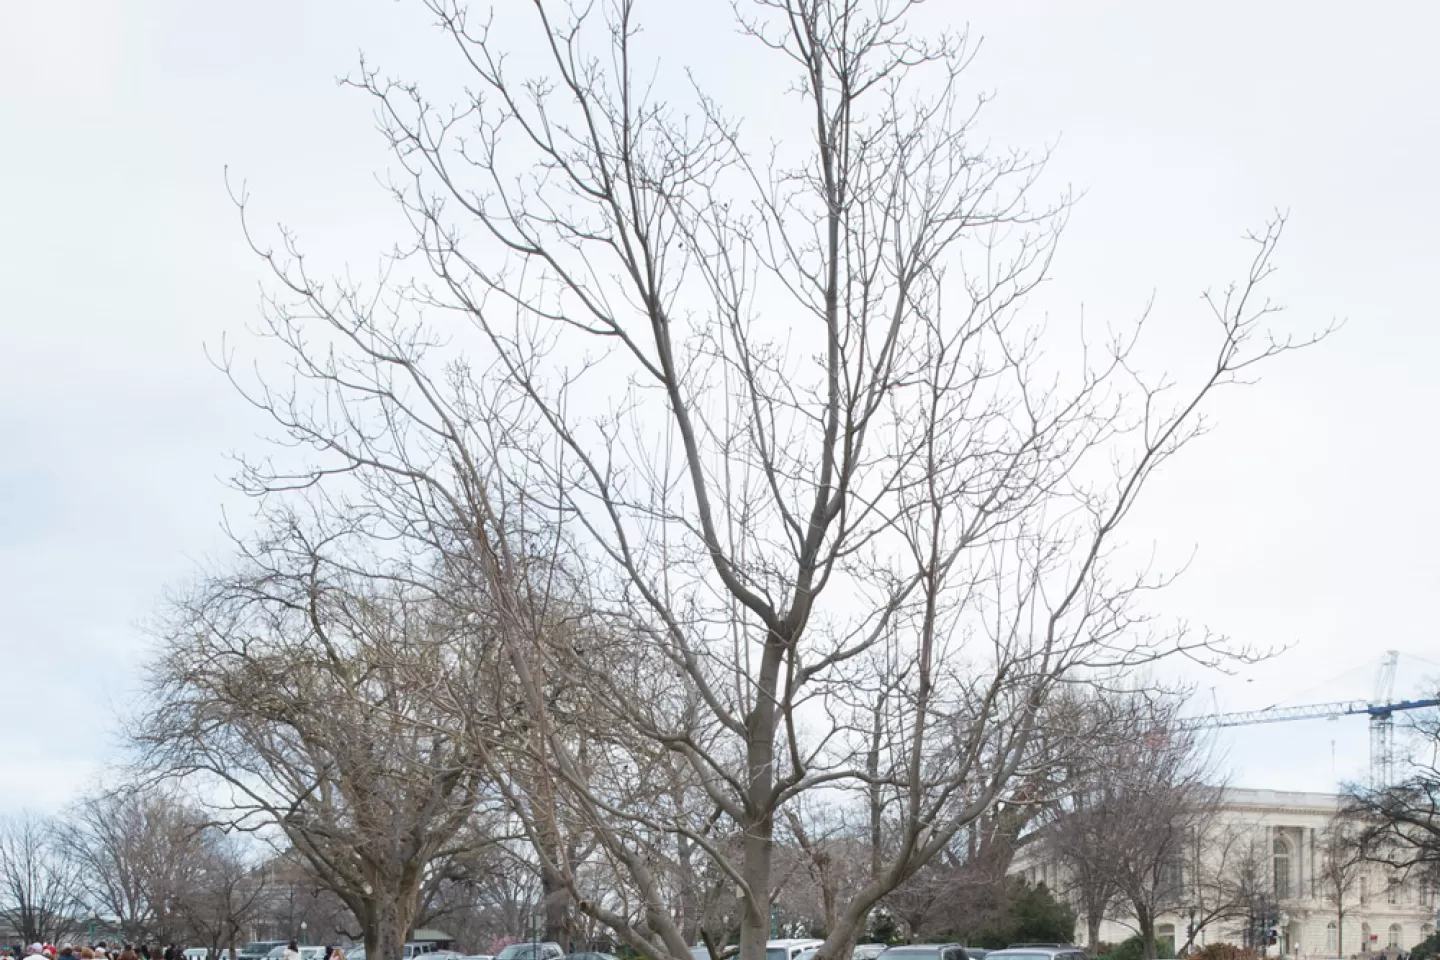 The Rep. Don Fuqua tree on the U.S. Capitol Grounds during winter.